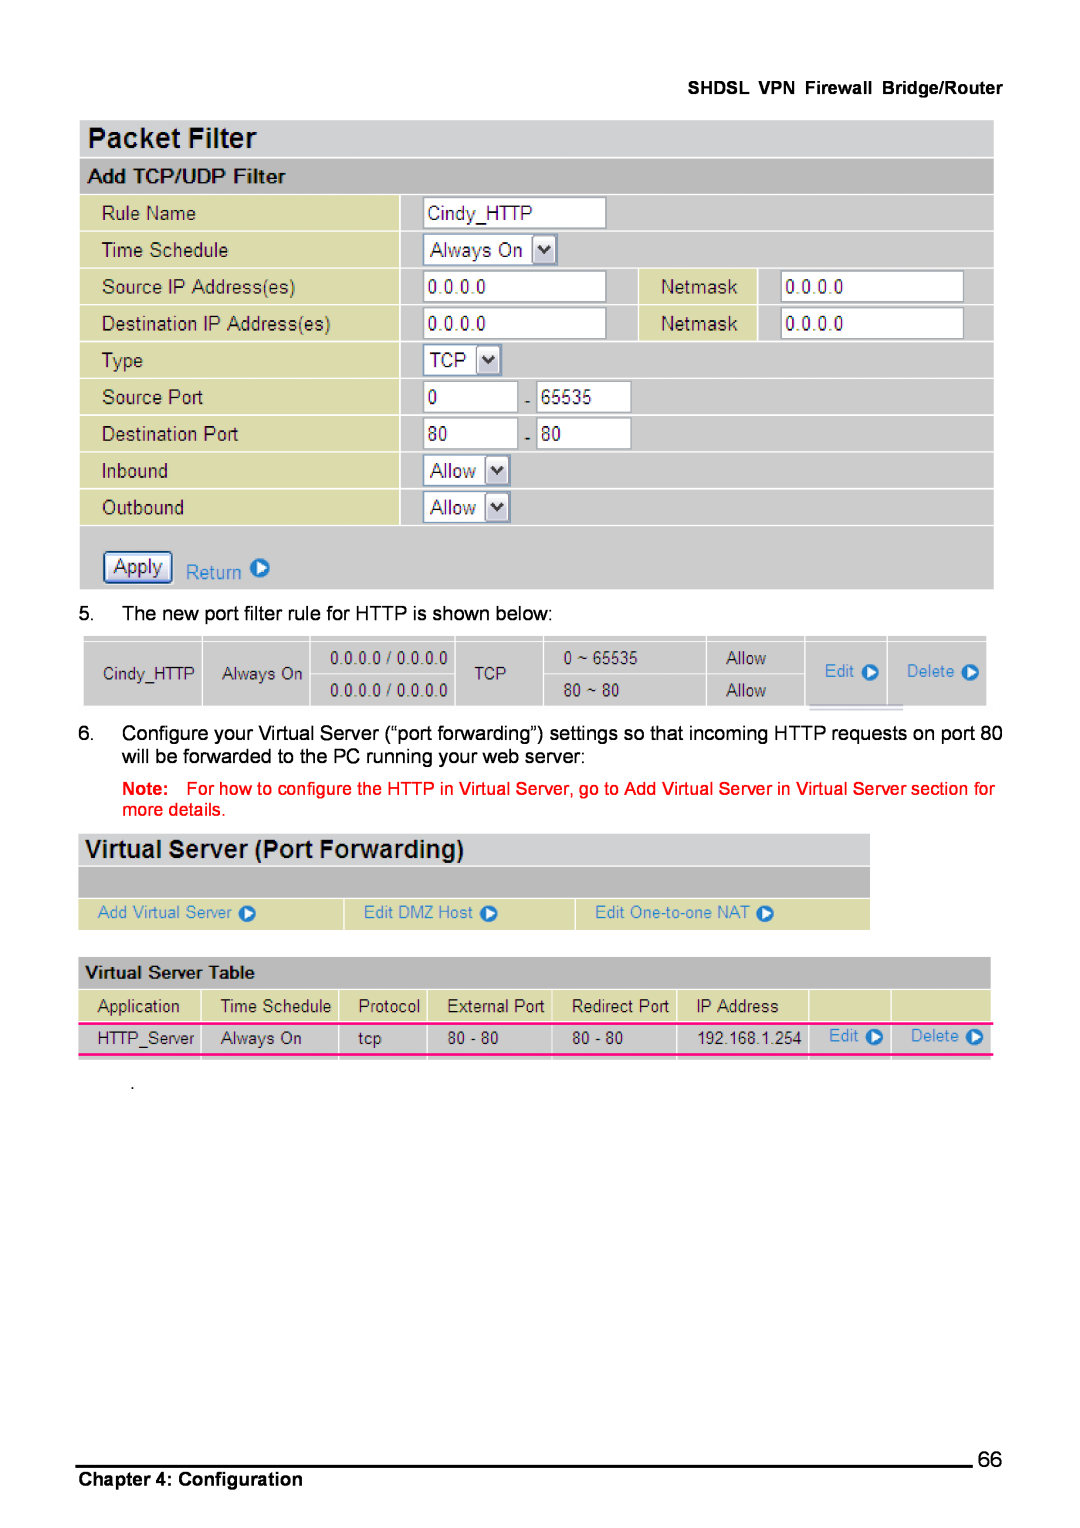 Billion Electric Company 8501 user manual The new port filter rule for HTTP is shown below, Configuration 